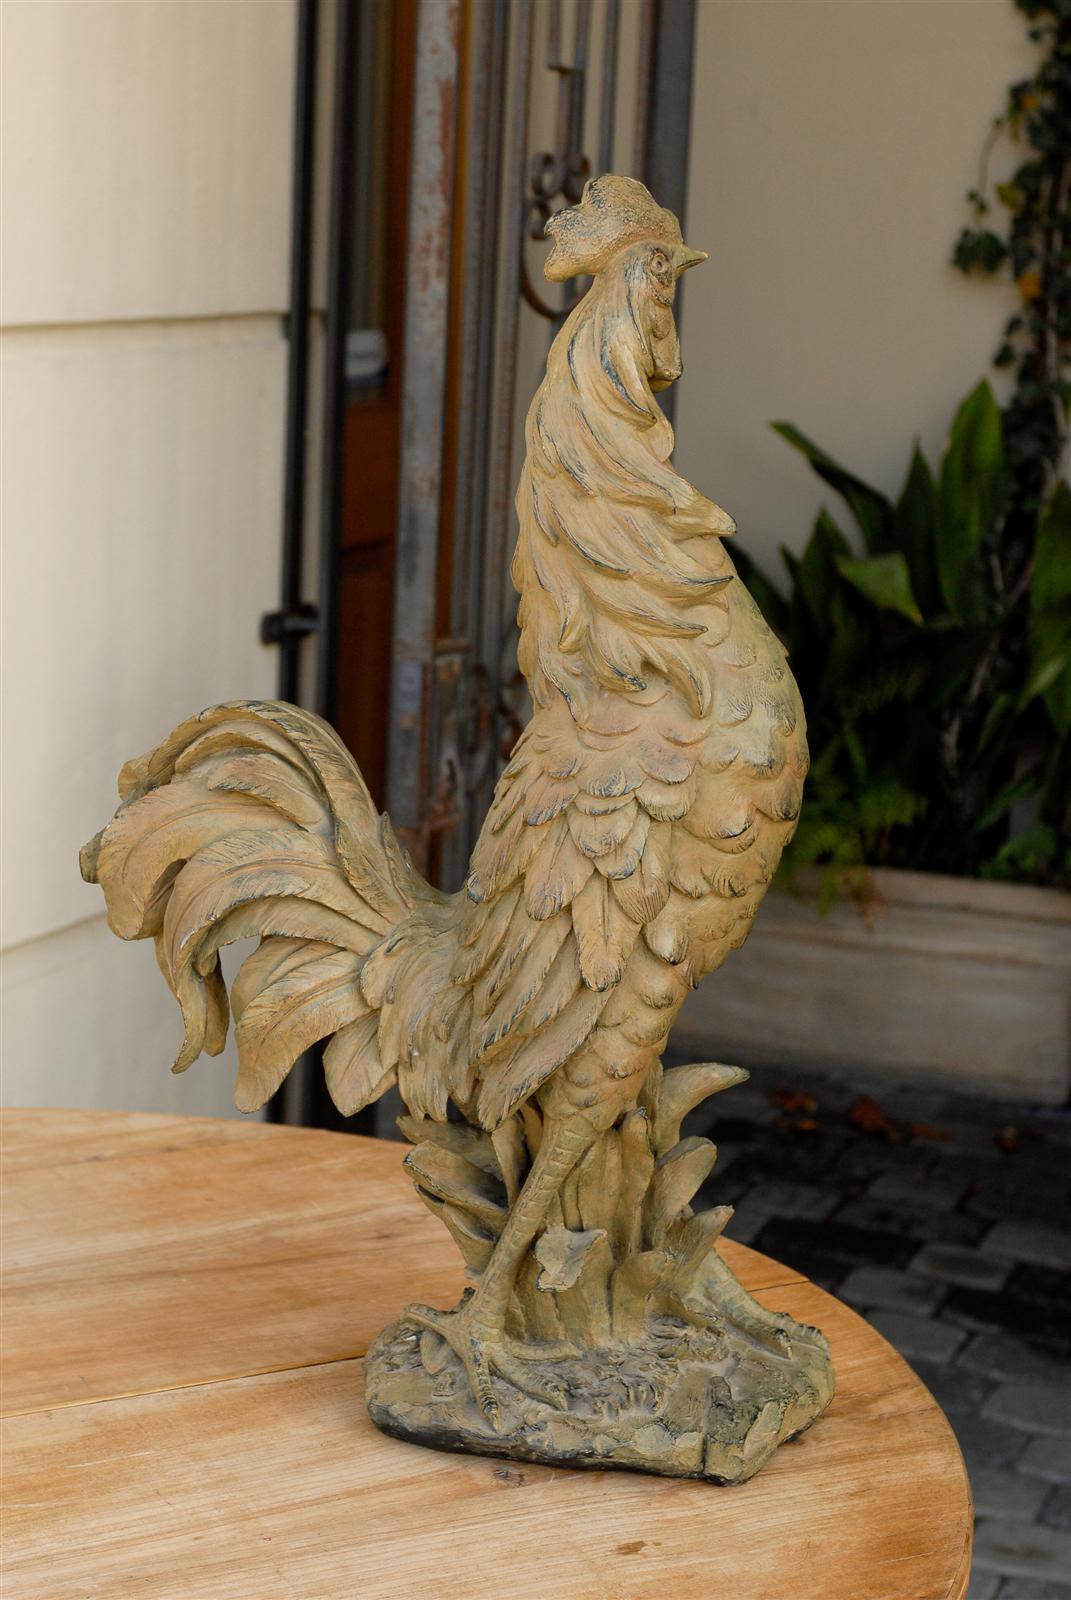 French Rooster Sculpture with Green & Black Accents from the Mid-20th Century For Sale 6